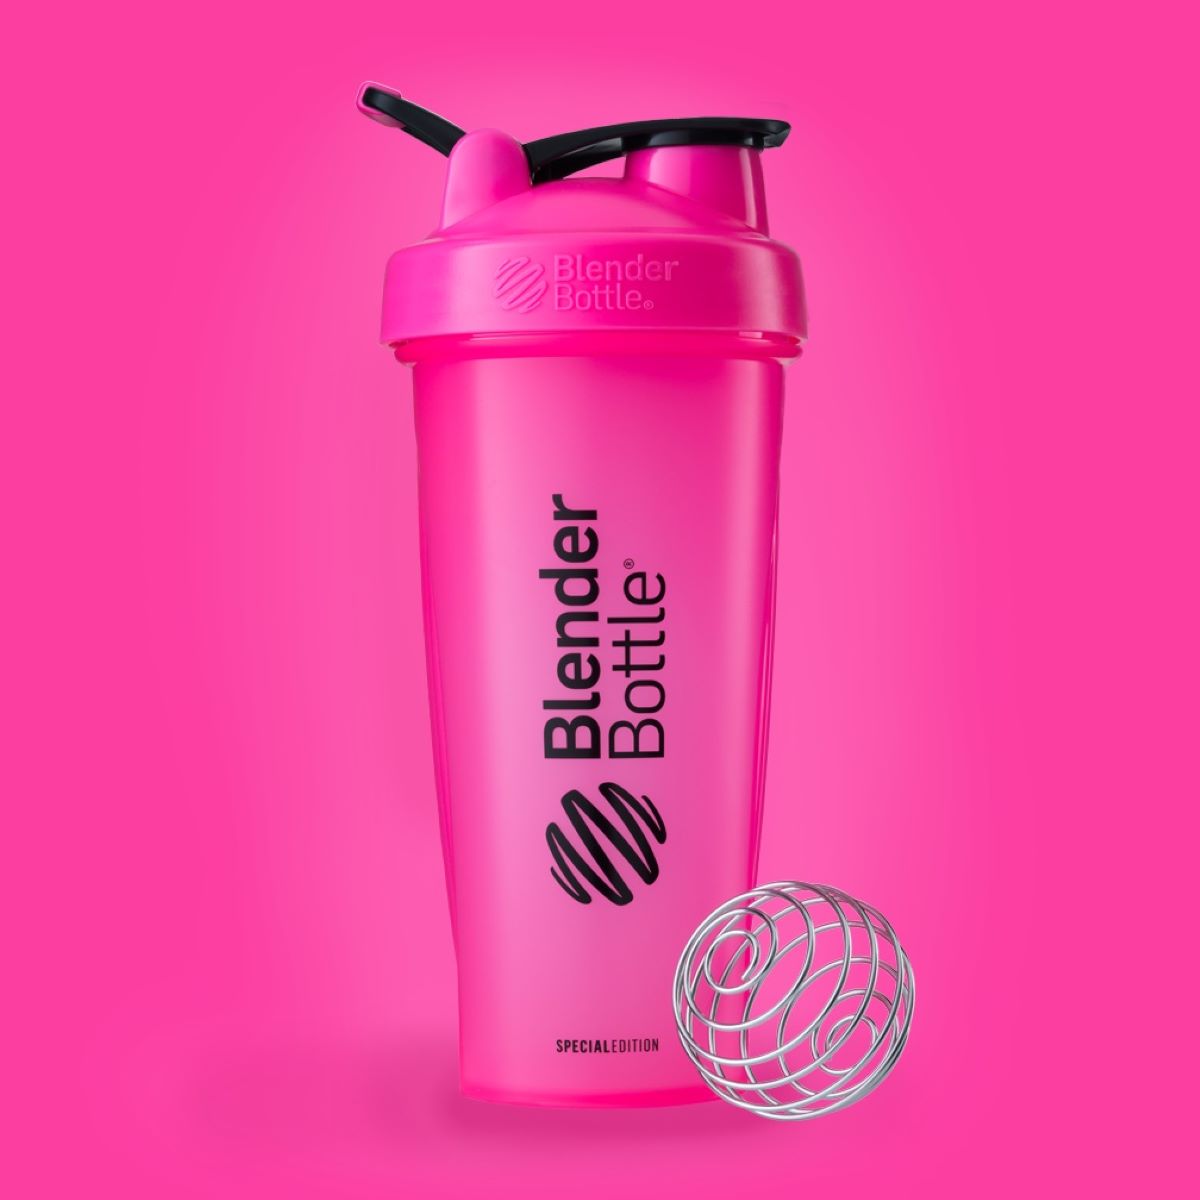 BlenderBottle Classic V2 Shaker Bottle Perfect for Protein Shakes and Pre  Workout, 20-Ounce, Light Pink